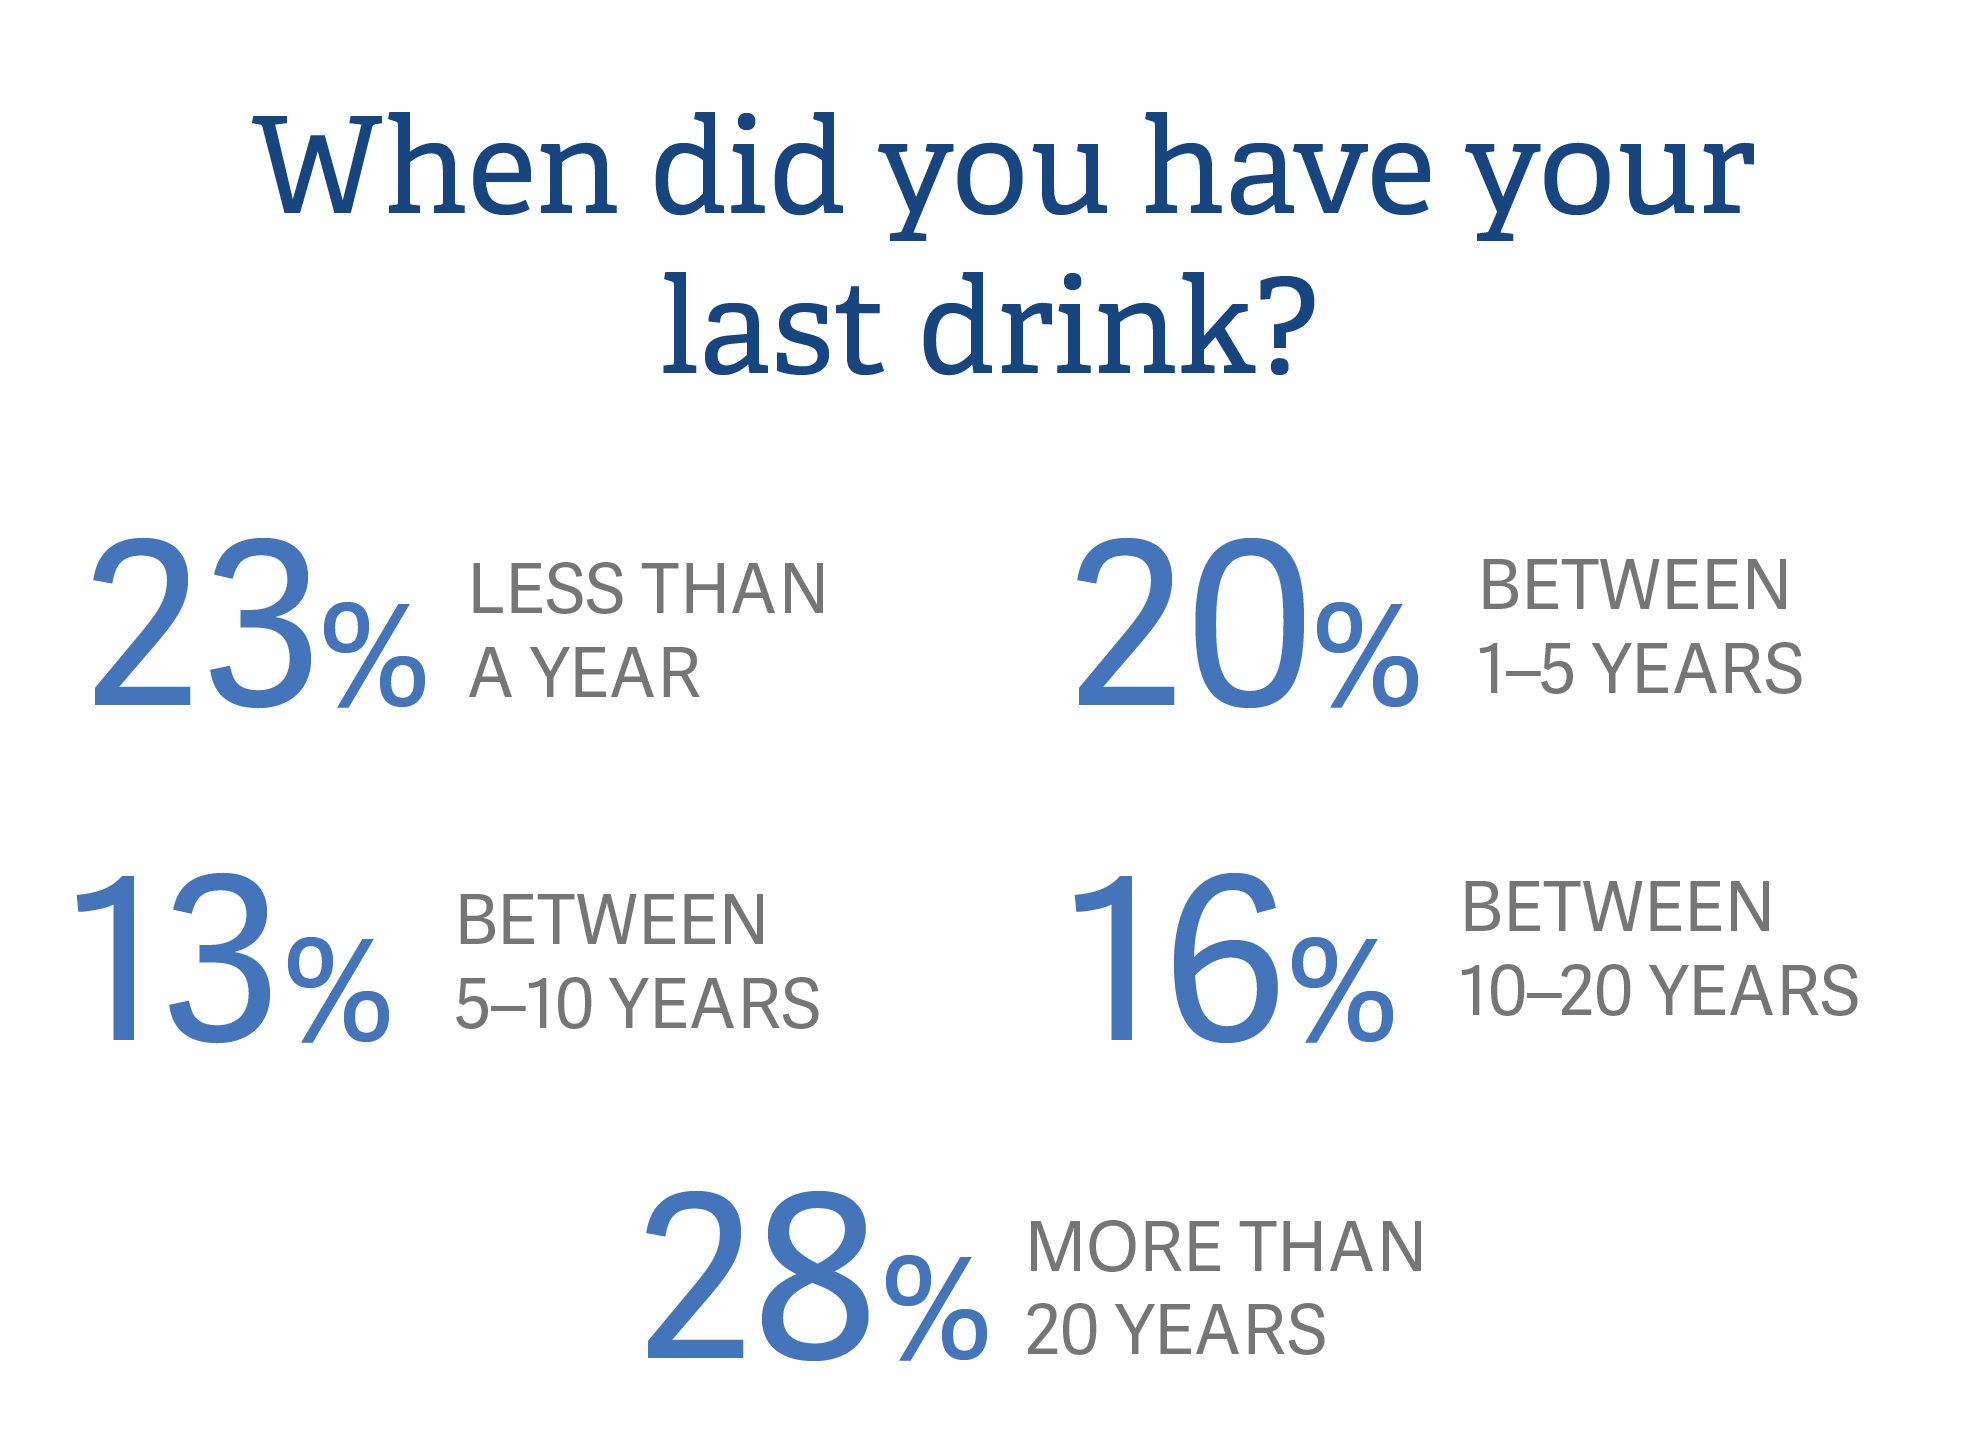 When did you have your last drink? 